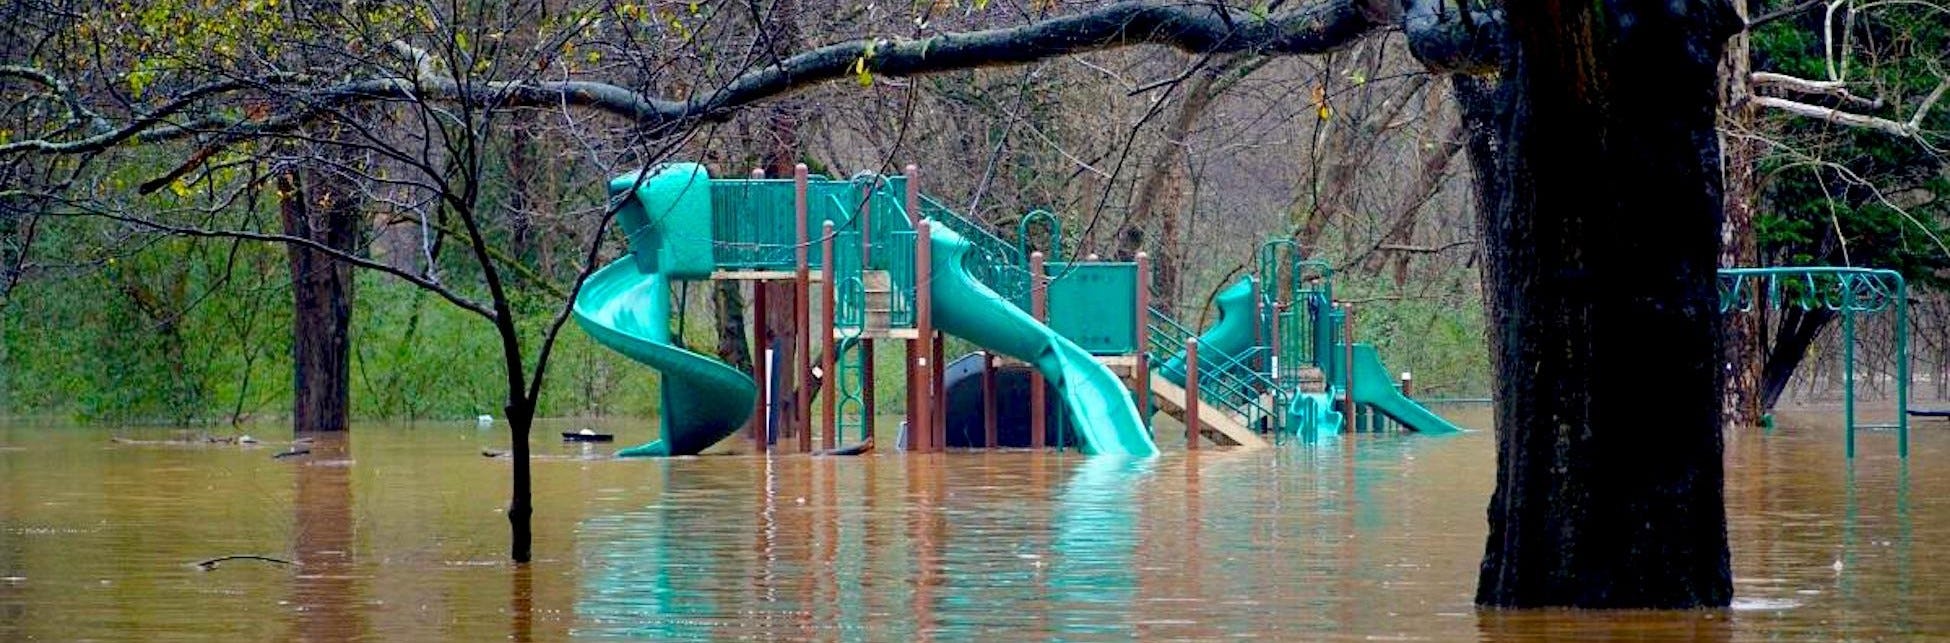 Inspecting a Playground After a Flood